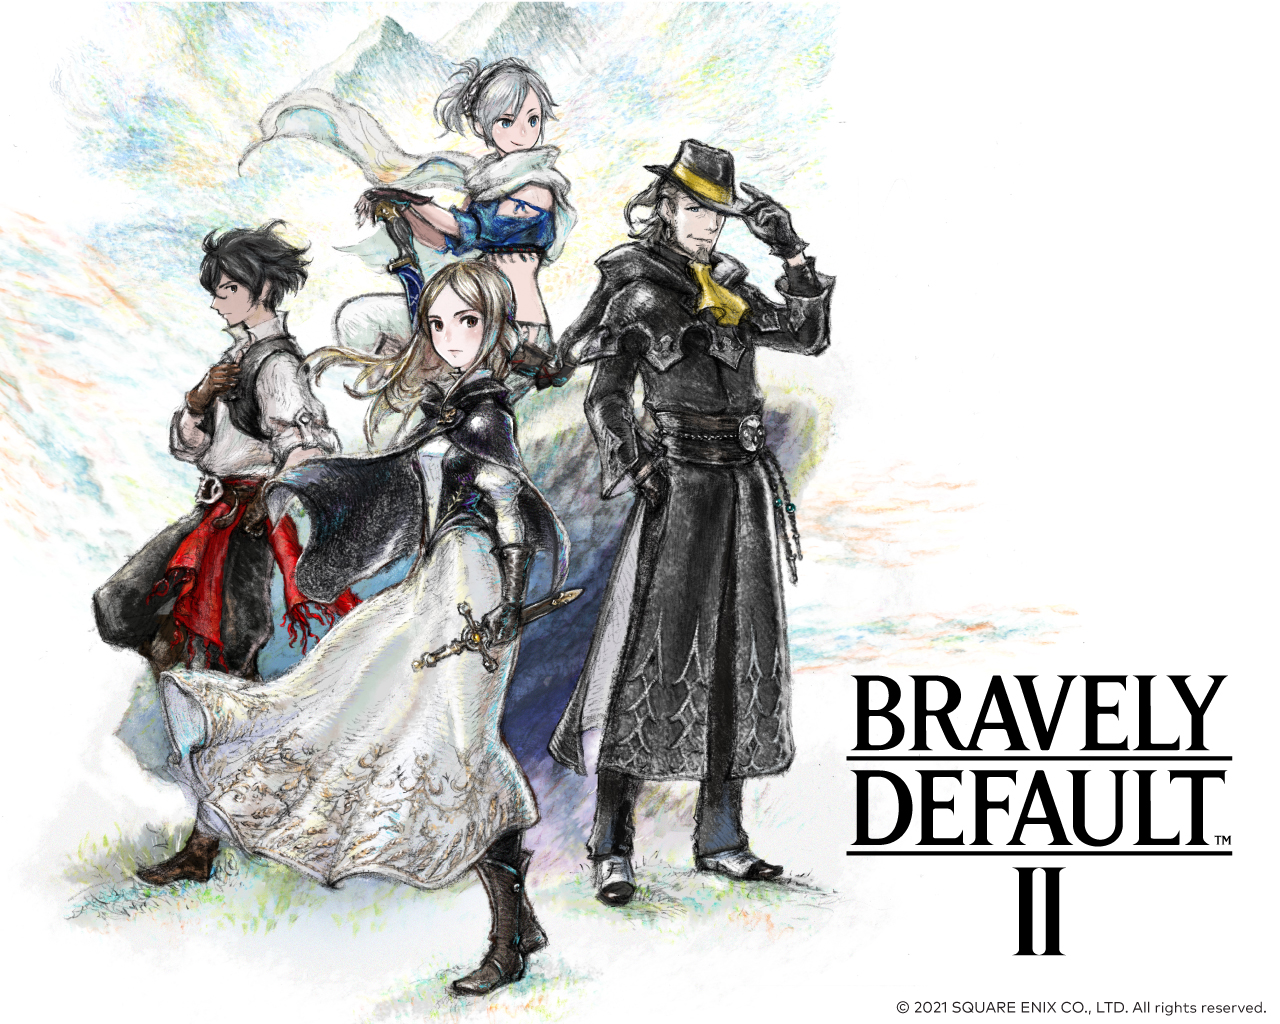 Bravely Default II Wallpaper, Square Enix, Free Download, Borrow, and Streaming, Internet Archive